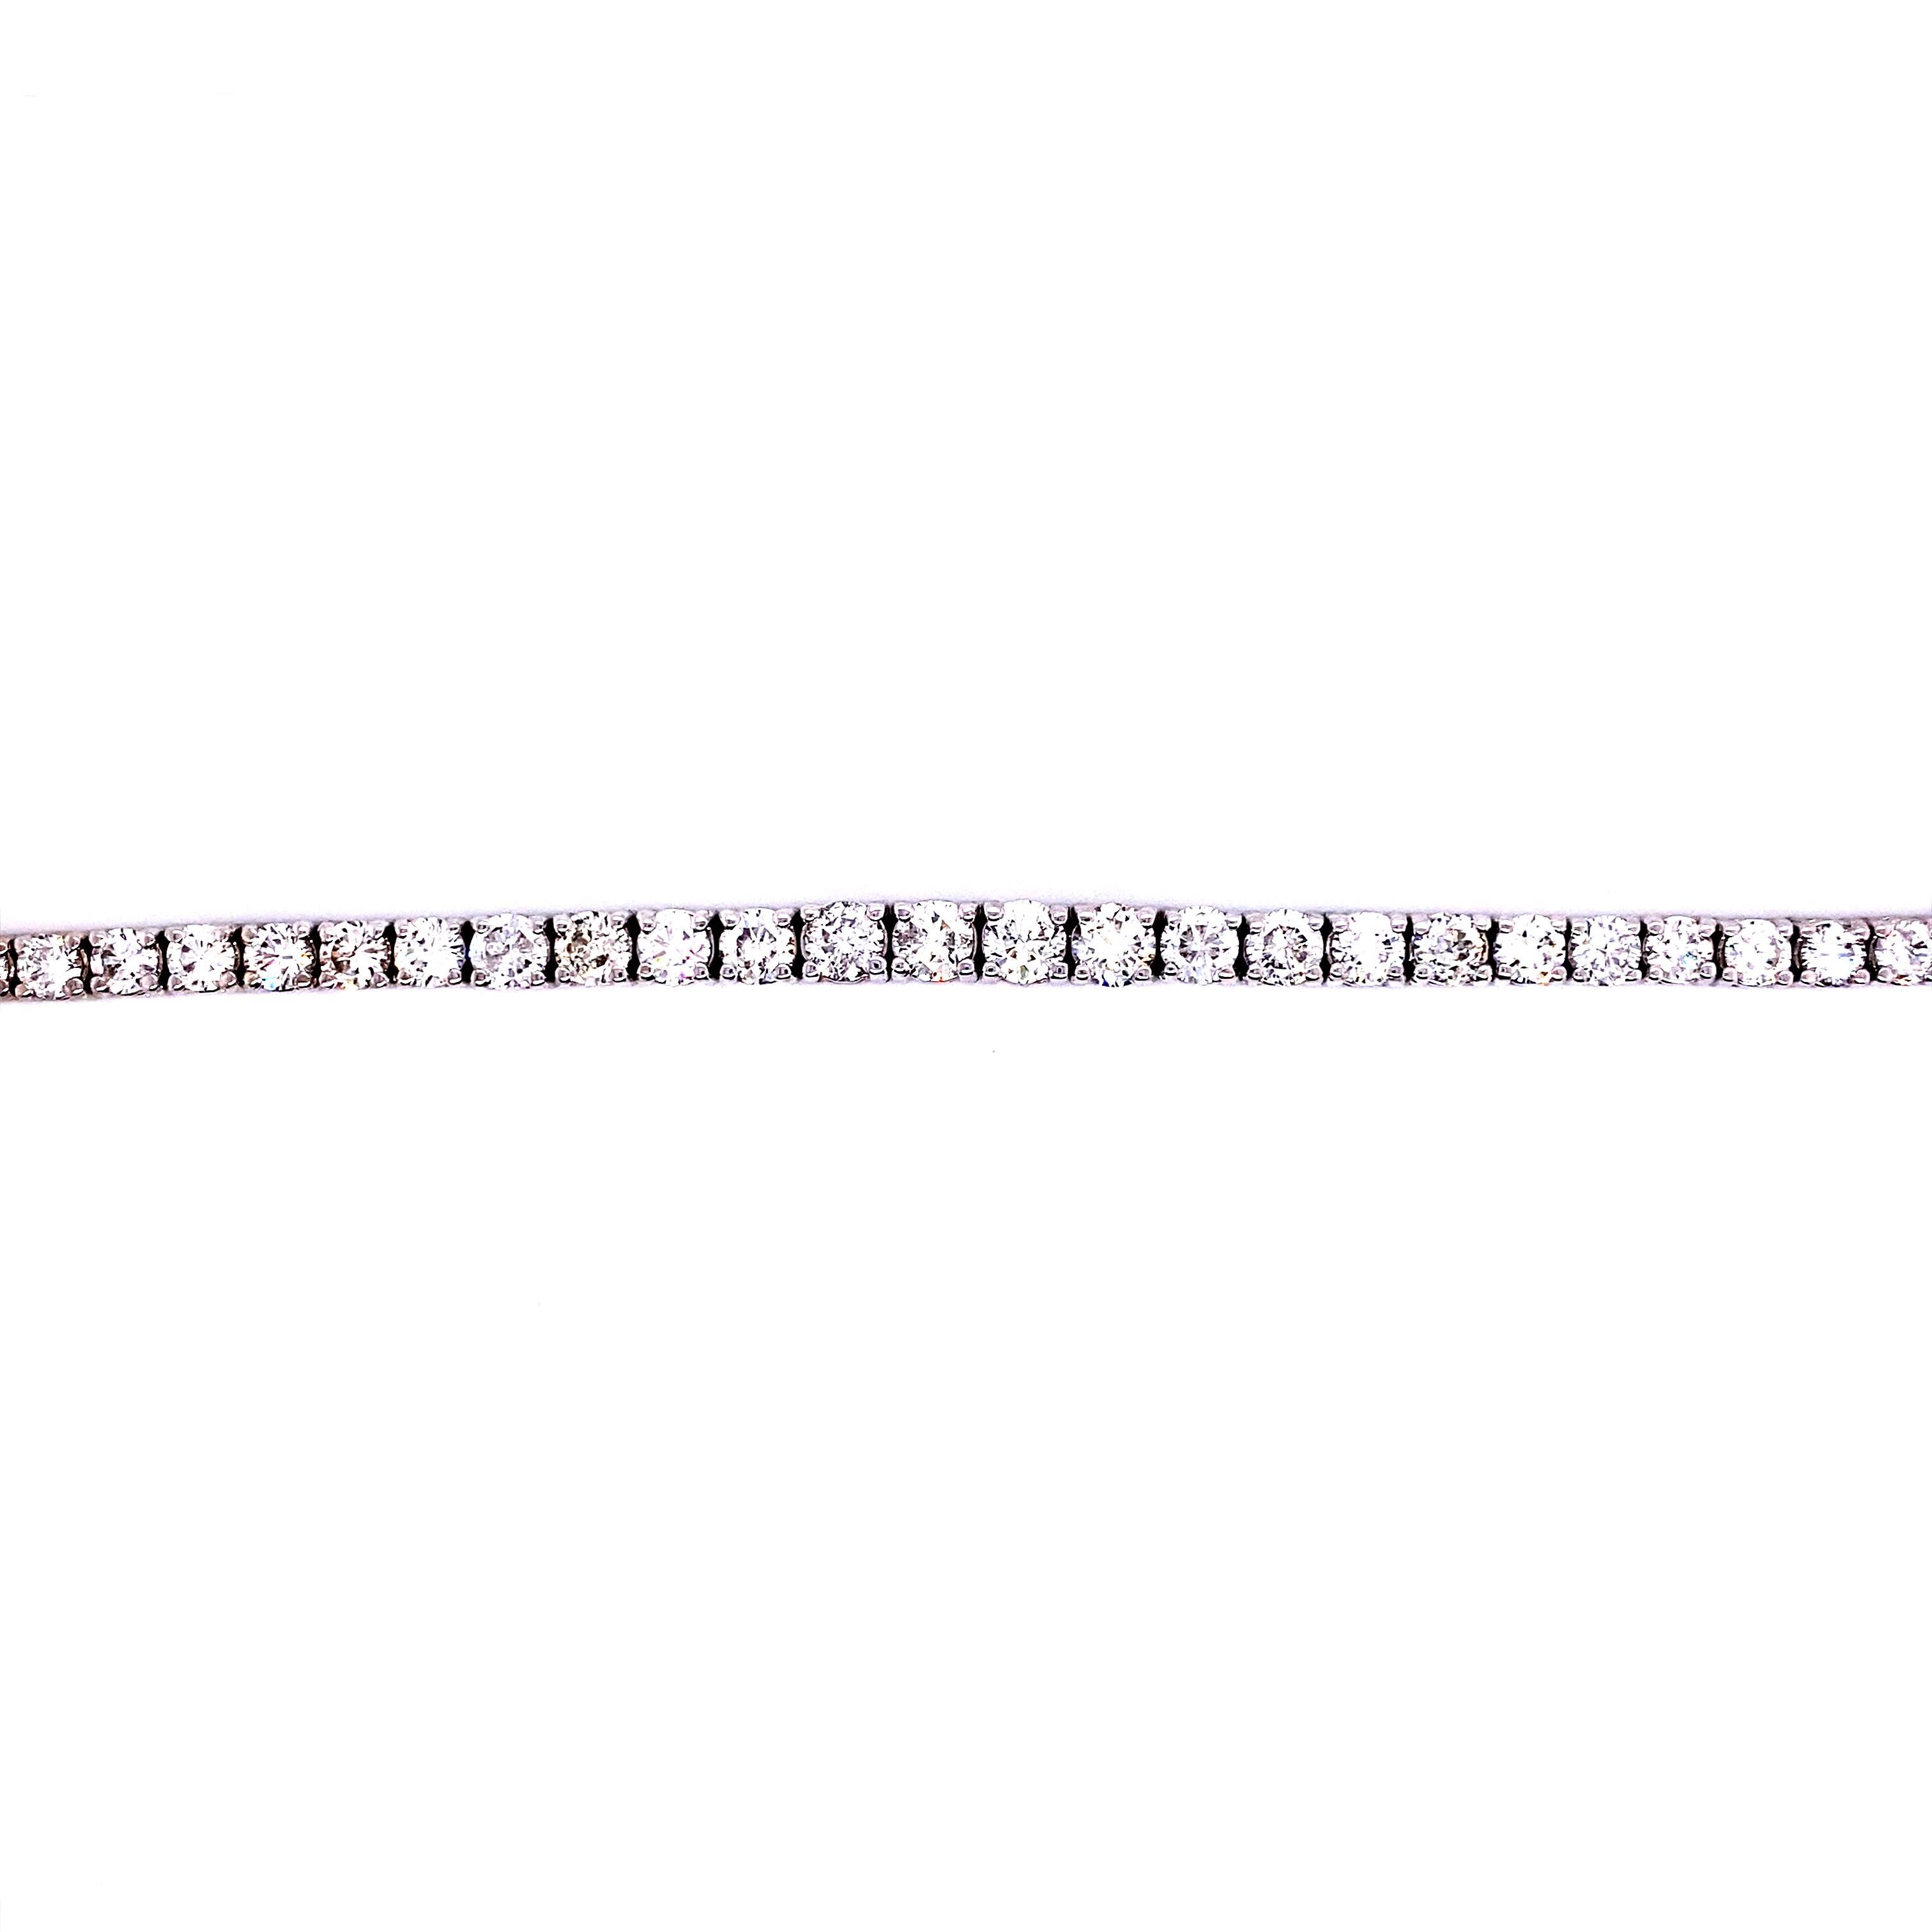 12.45 Carat Diamond Tennis Bracelet  

The Tennis bracelet was coined when the US professional tennis player Chris Evert, played a match in 1987, and her diamond line bracelet flew off her arm. She stopped to find it, and from that moment the